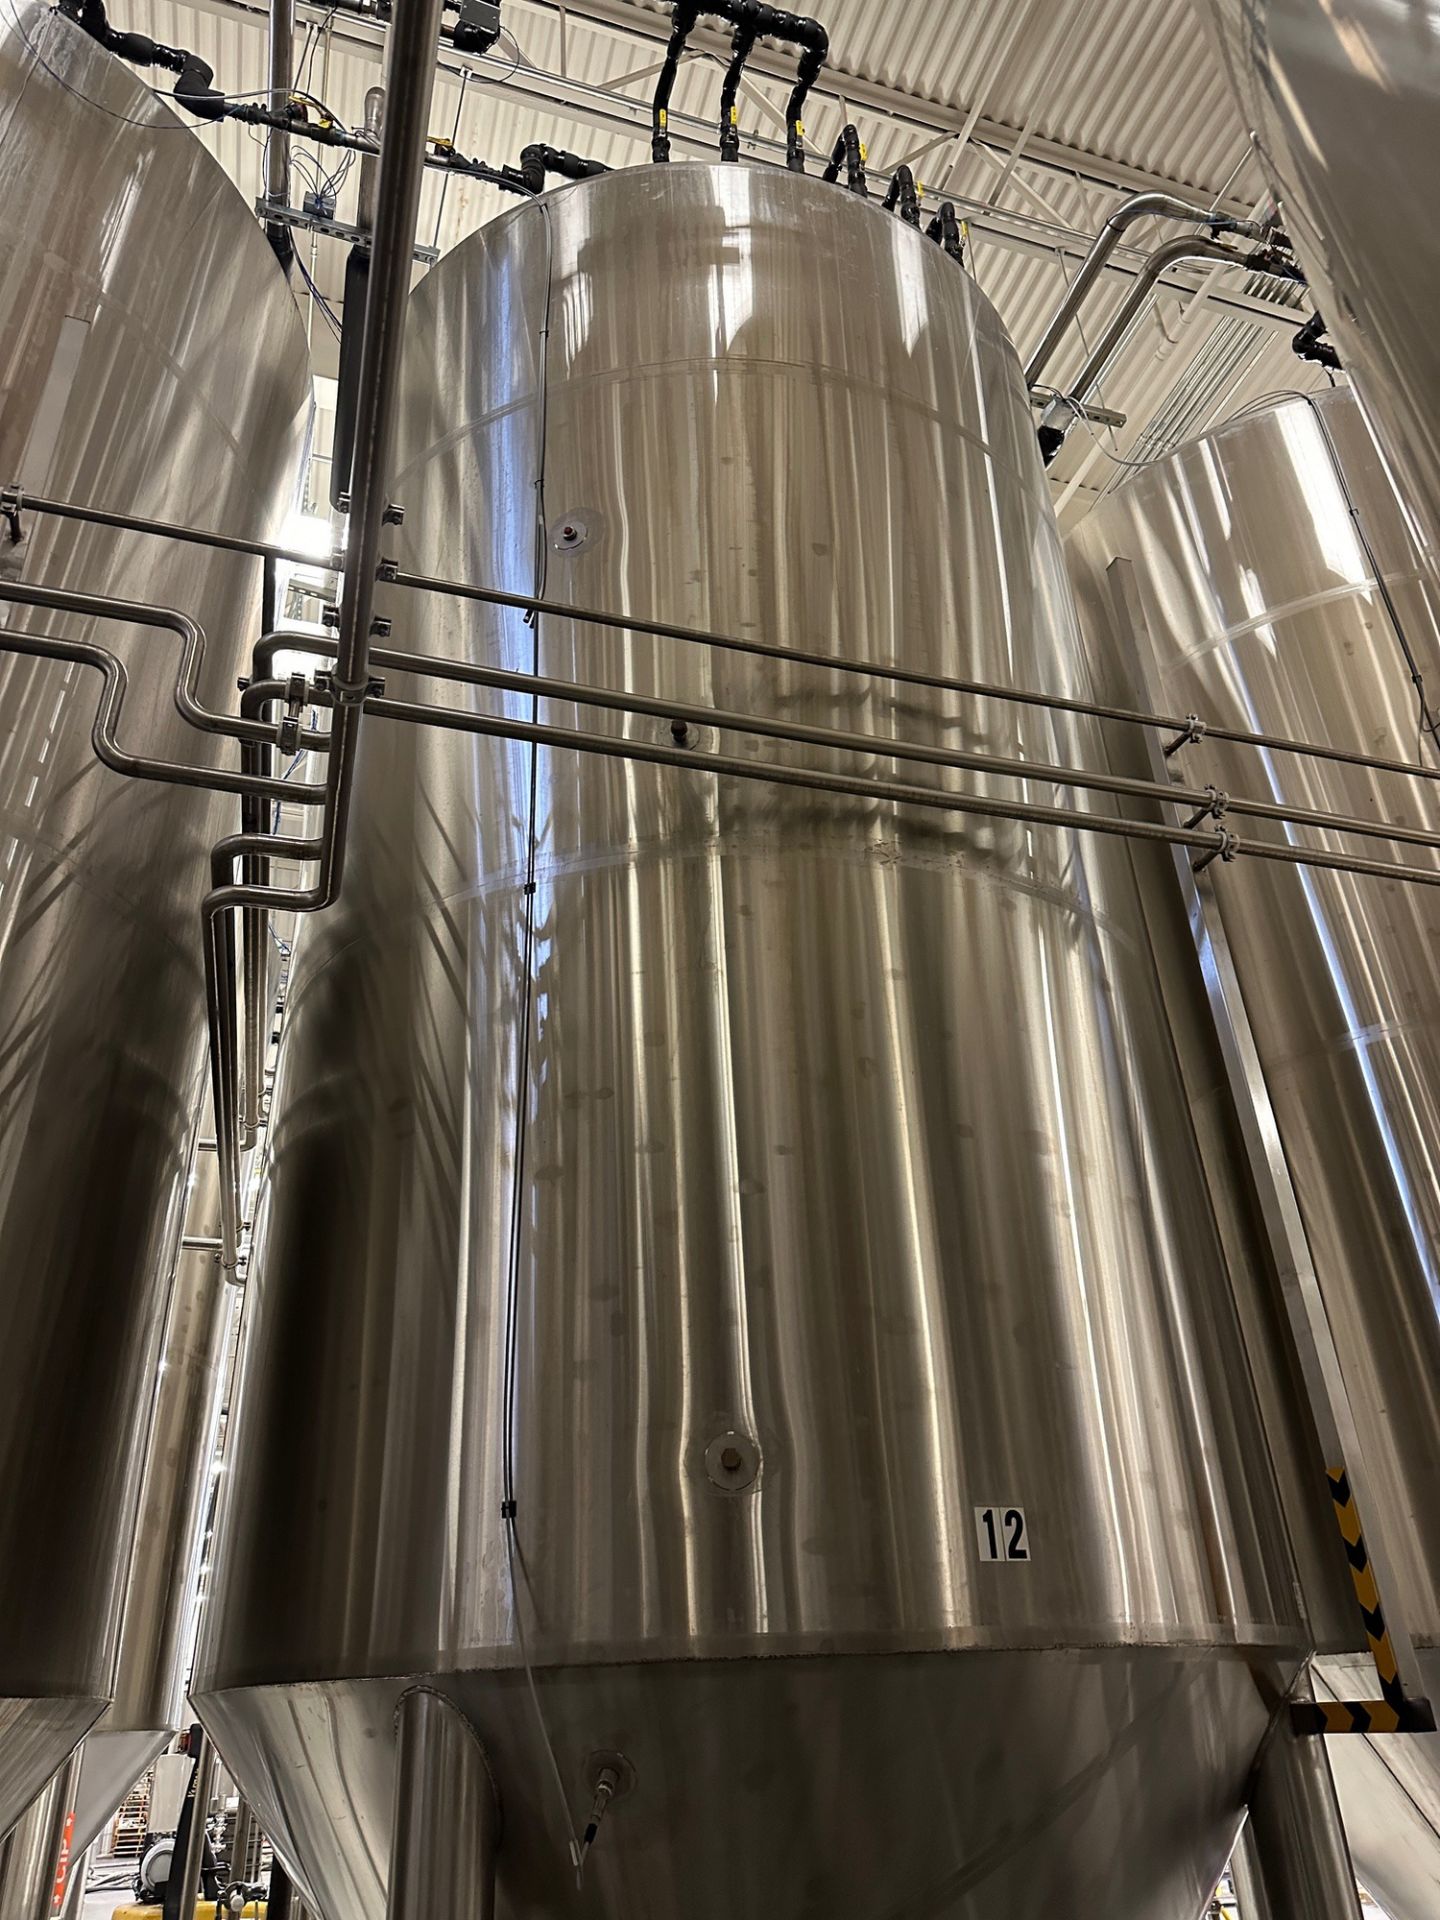 (1 of 8) 2020 Marks 132 BBL FV / 175 BBL or 5400 Gal Max Capacity Fermentation Tank | Rig Fee $2620 - Image 3 of 4